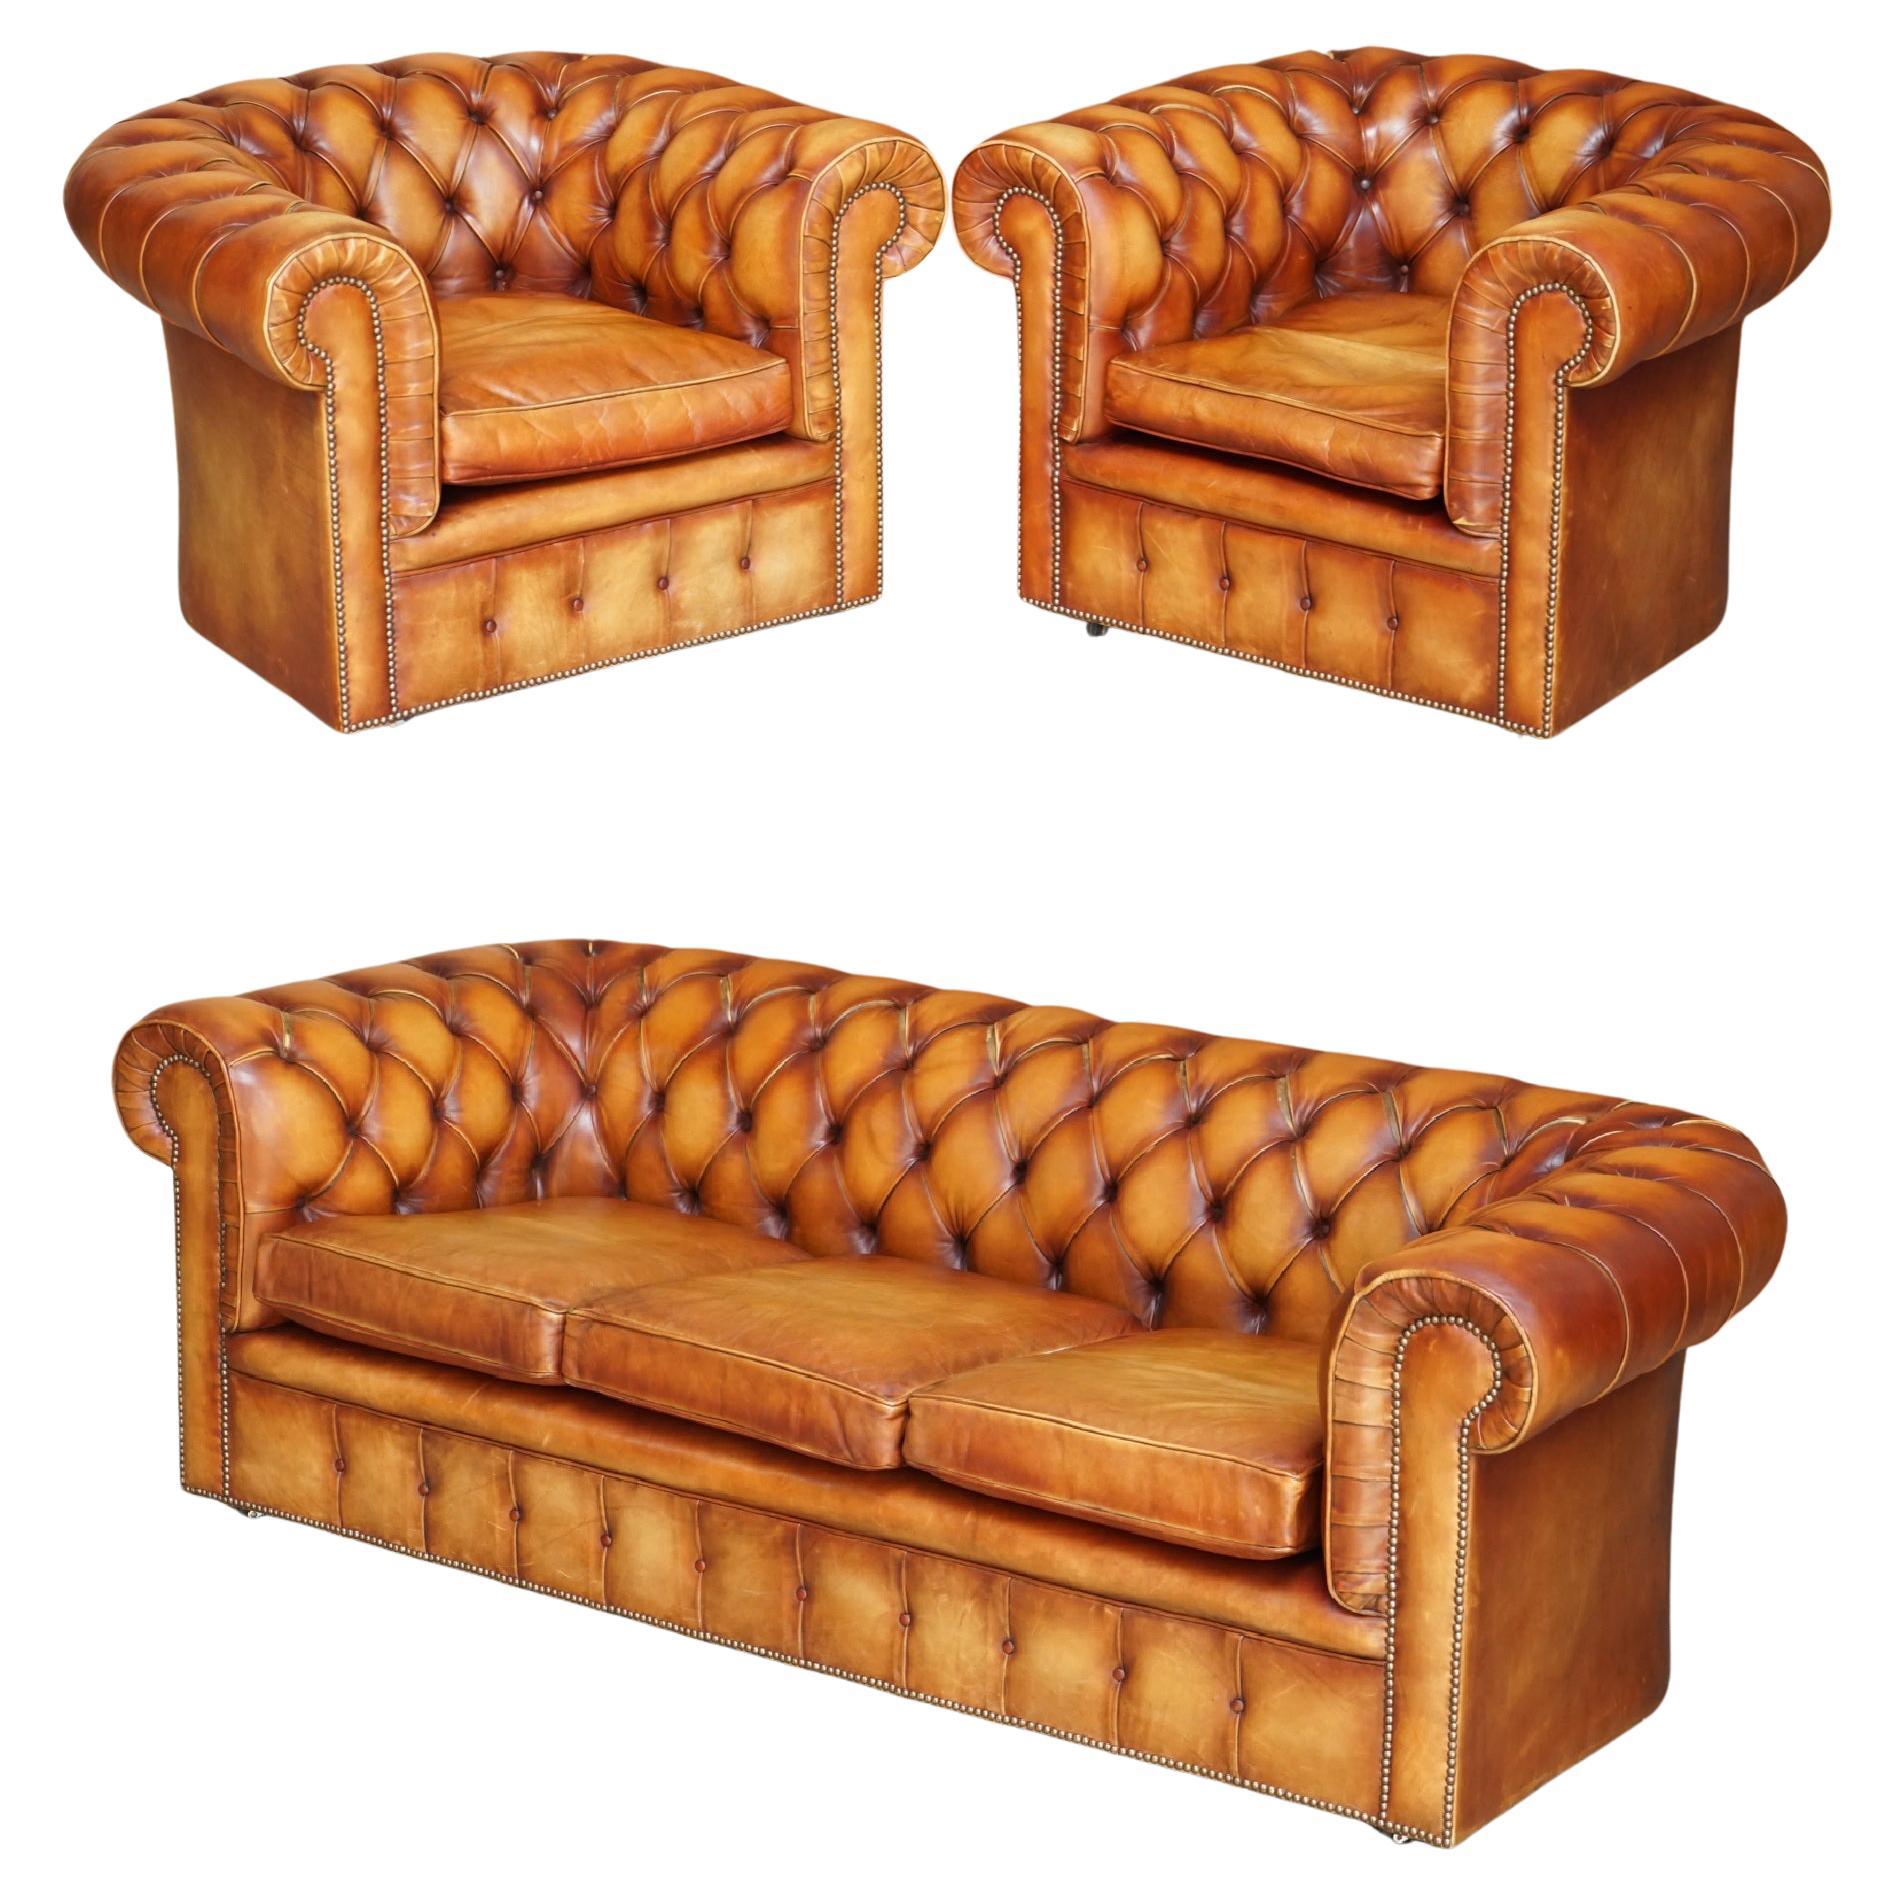 Old Chesterfield Club Three Piece Sofa & Pair of Armchairs Suite Brown Leder im Angebot